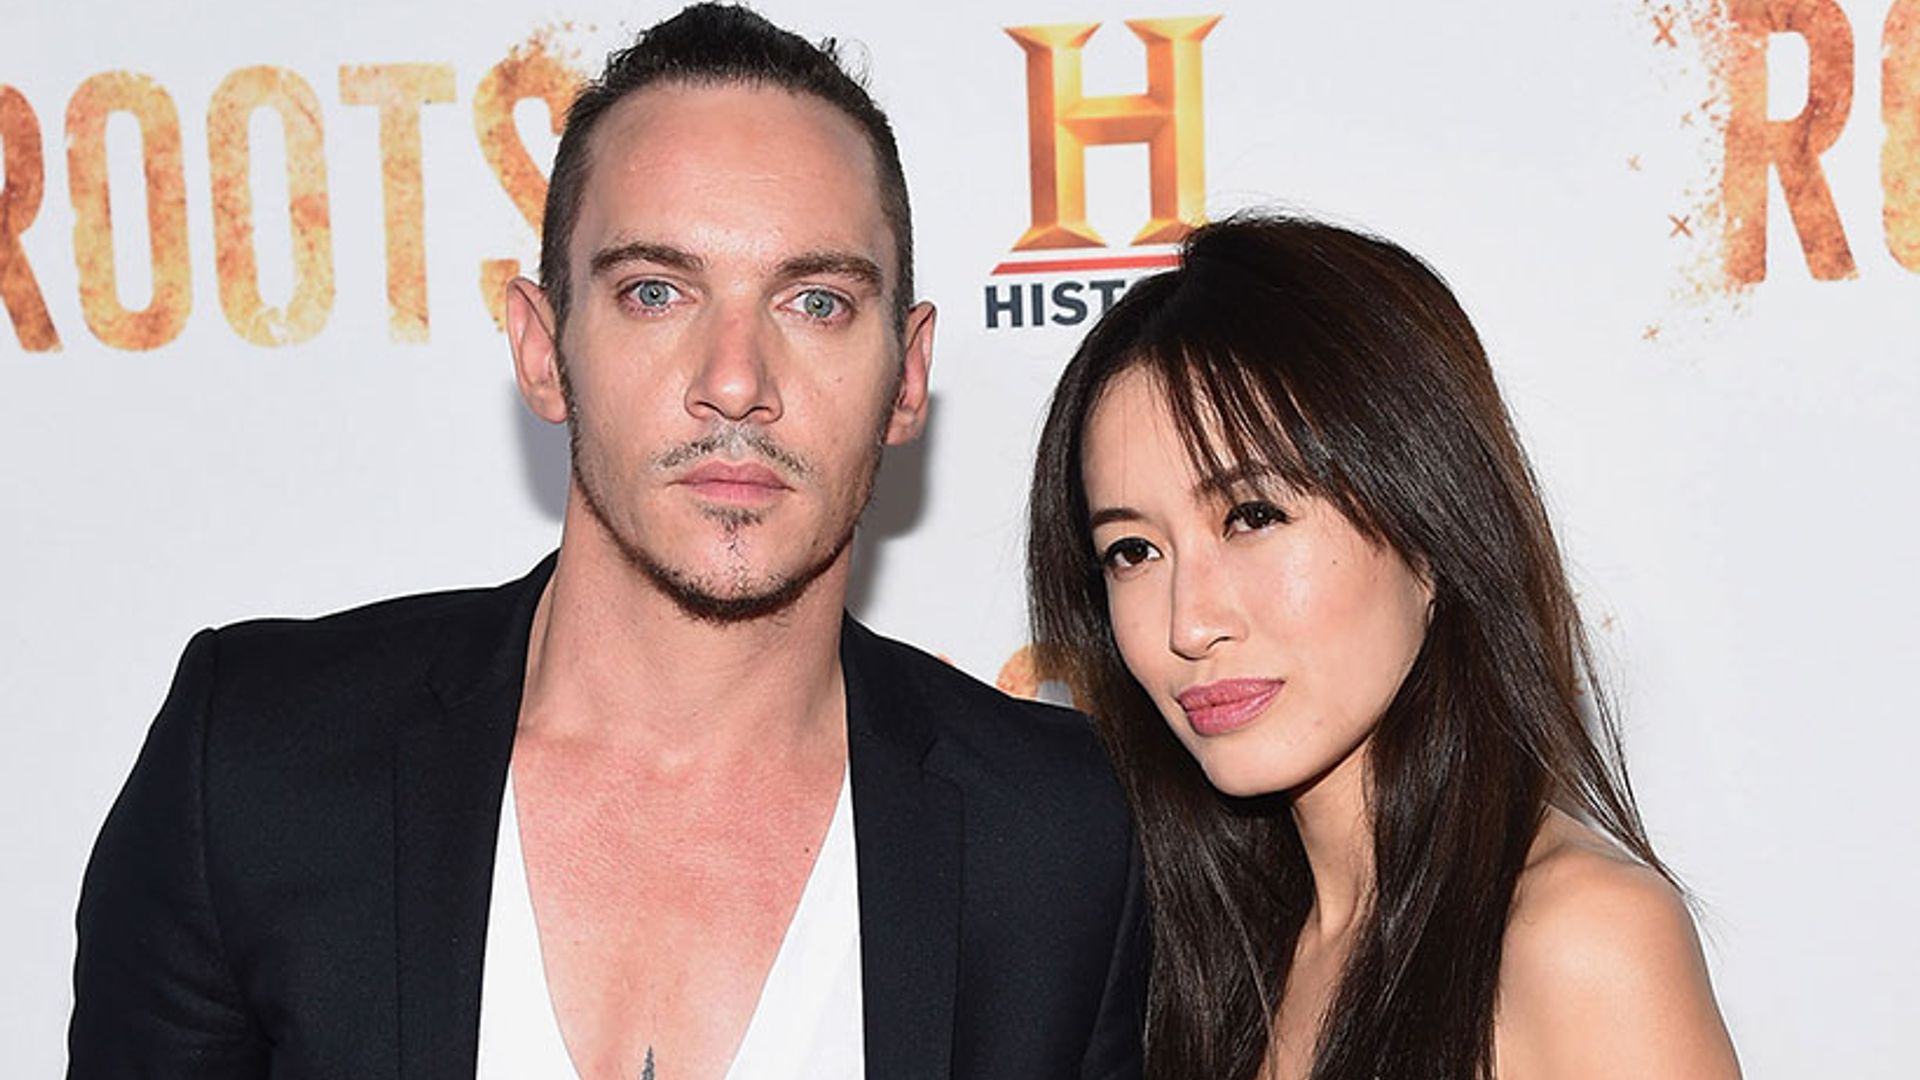 Jonathan Rhys Meyers and his fiancée Mara Lane are expecting their first baby: 'The best present'